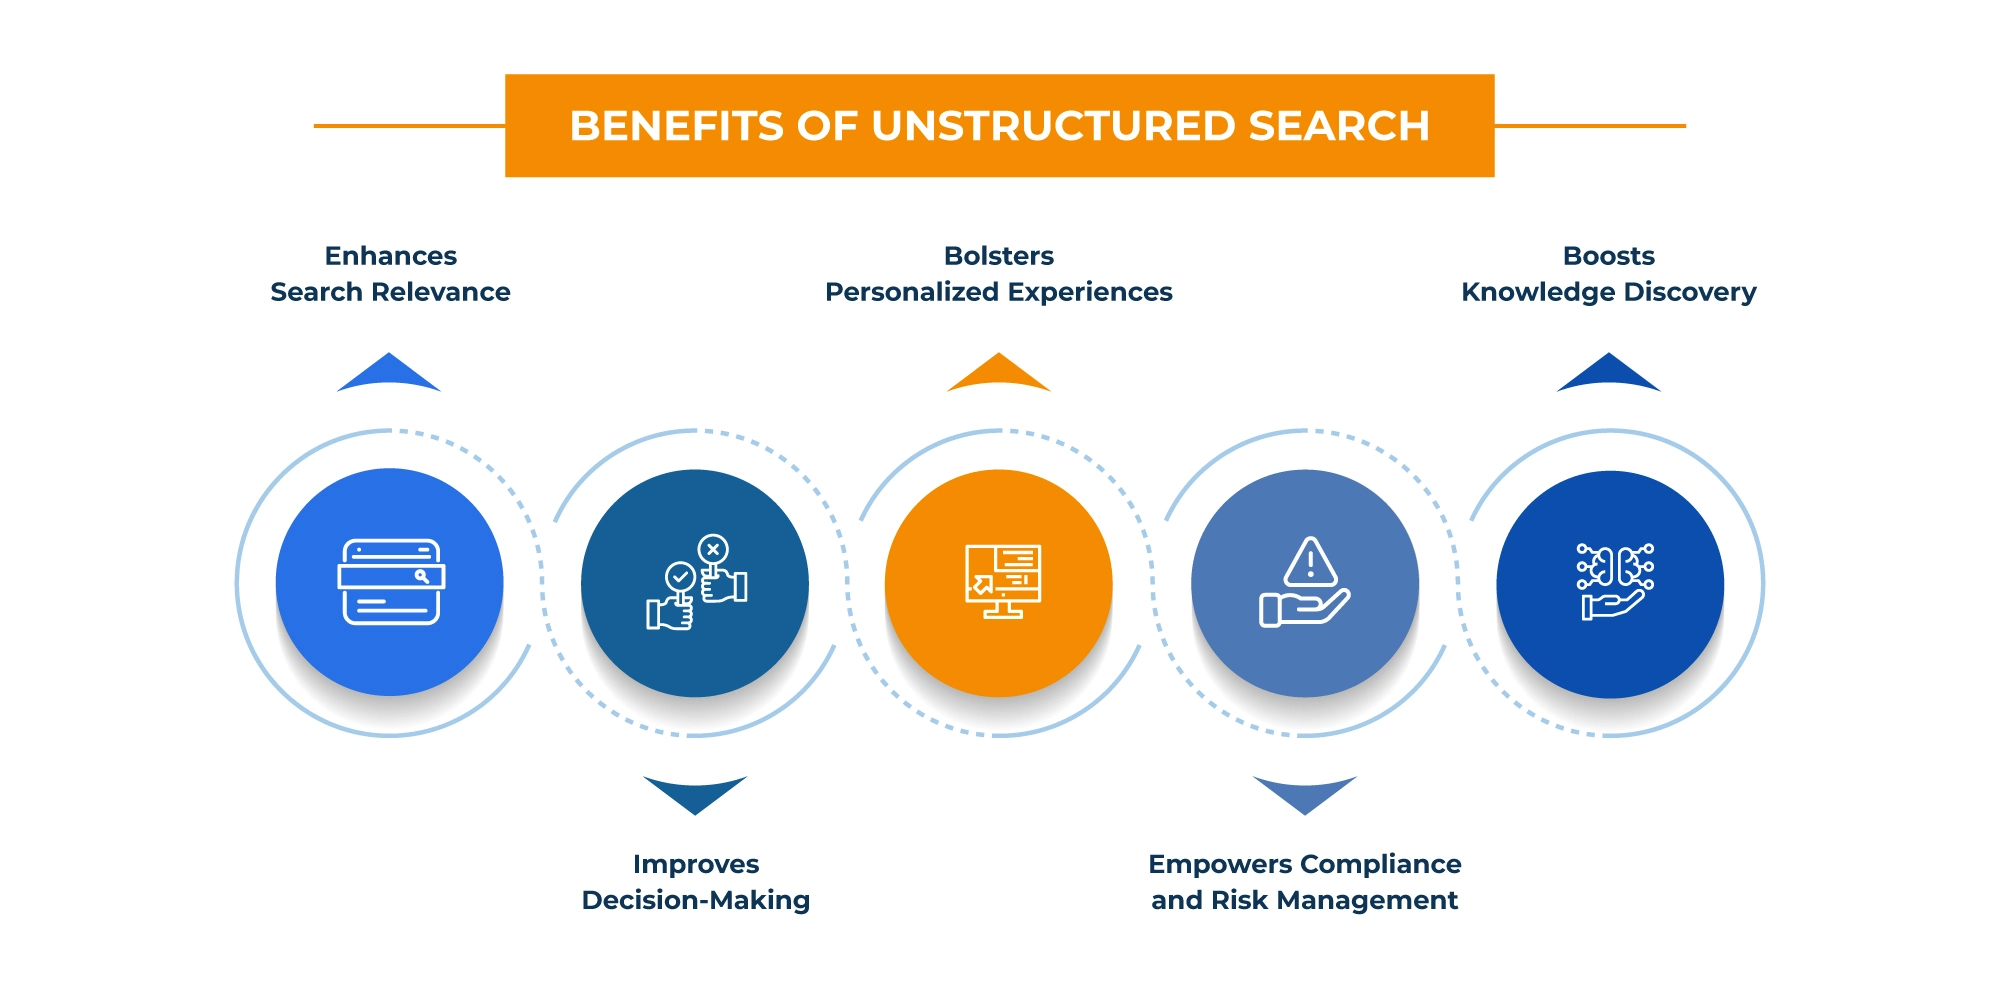 Benefits of Unstructured Search